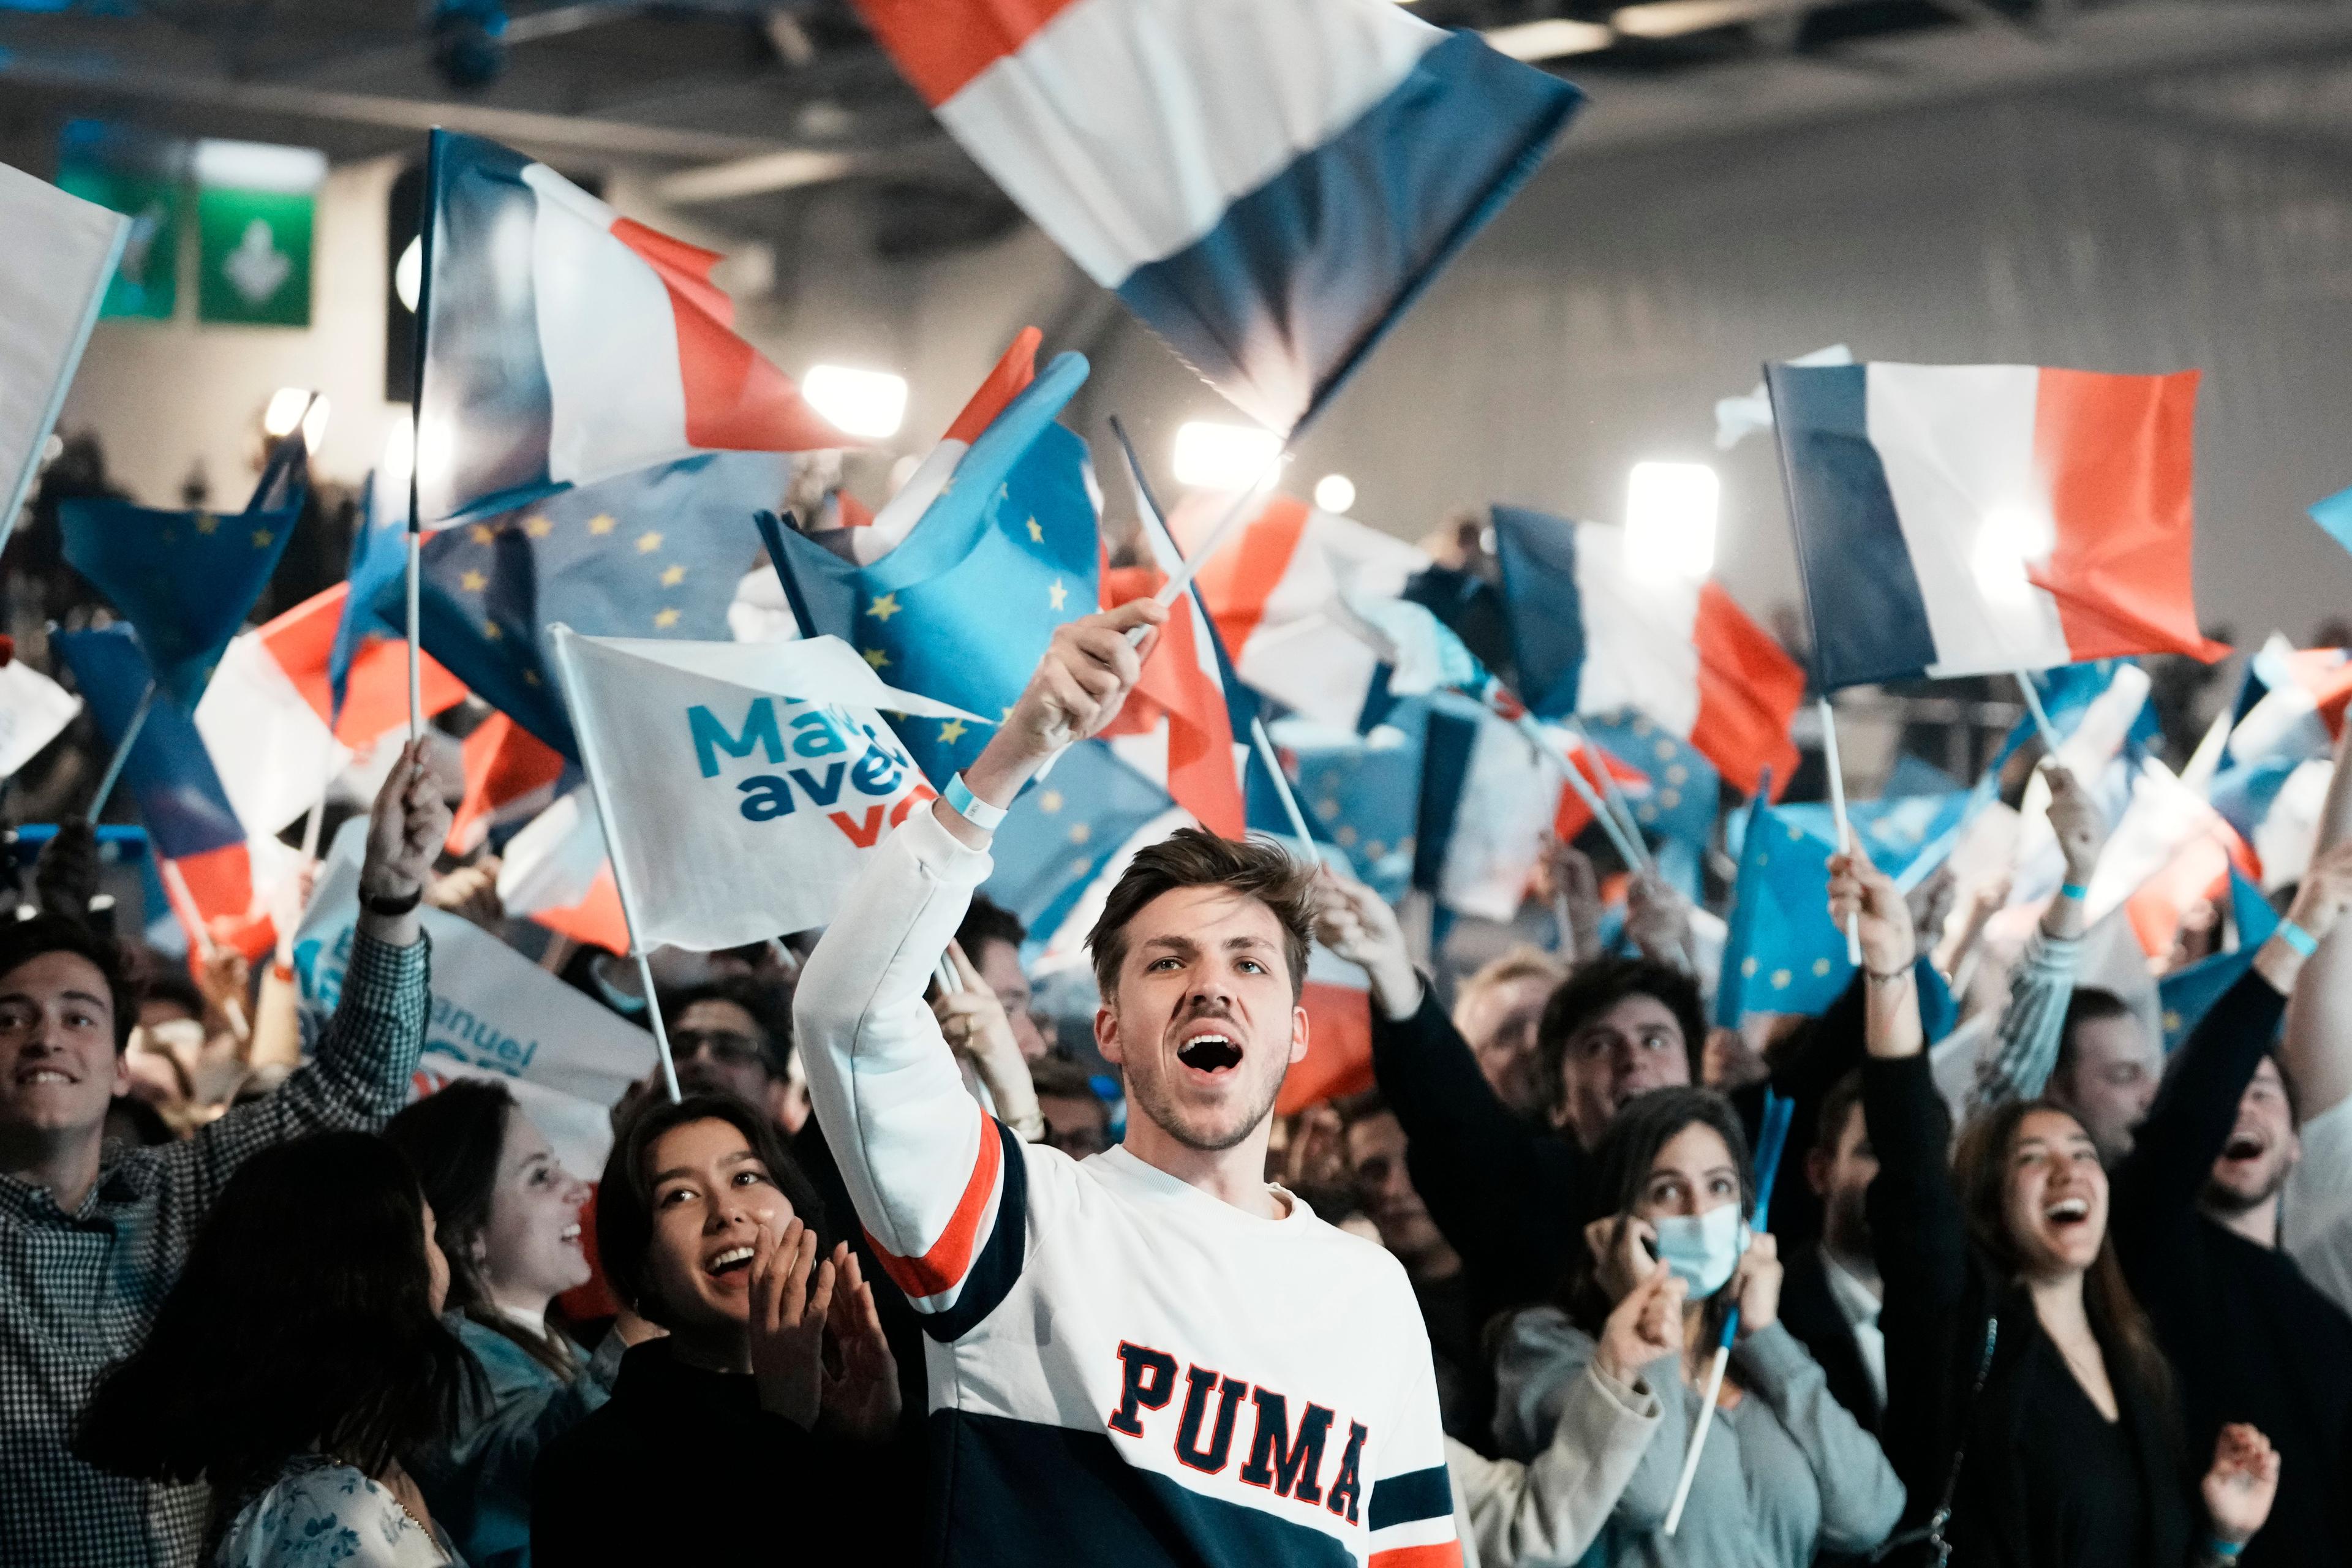 France’s elections end up with no clear majority